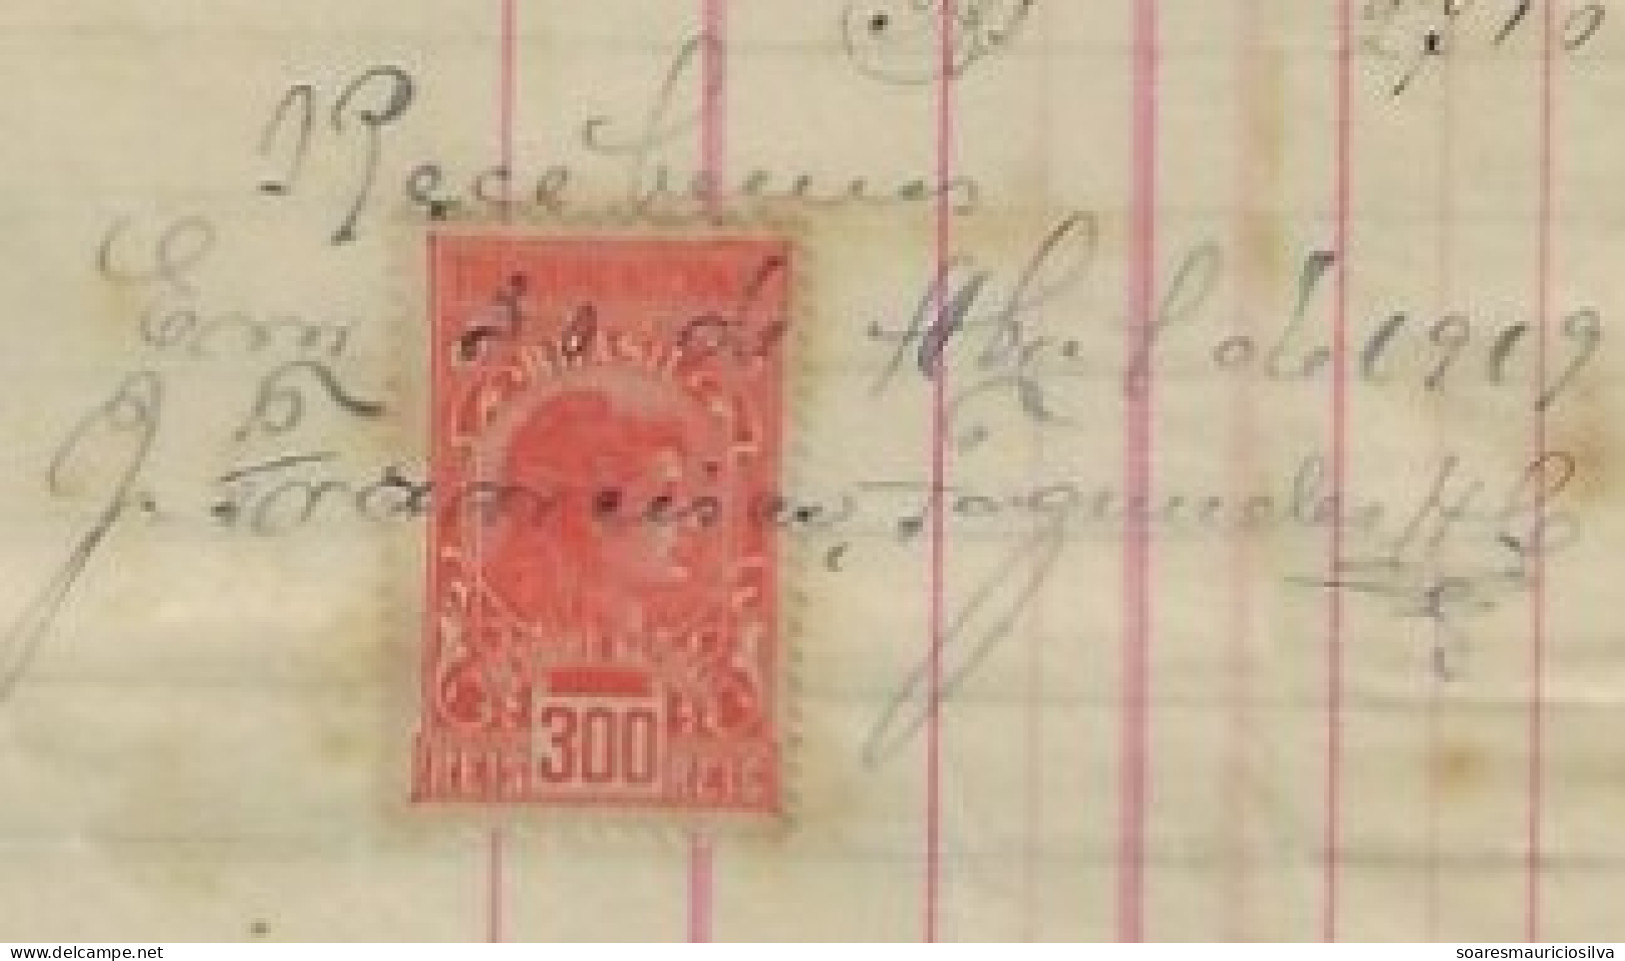 Brazil 1919 Cascatinha Warehouse By J. Francisco, Fagundes & Co Invoice Issued In Petrópolis National Tax Stamp 300 Réis - Lettres & Documents